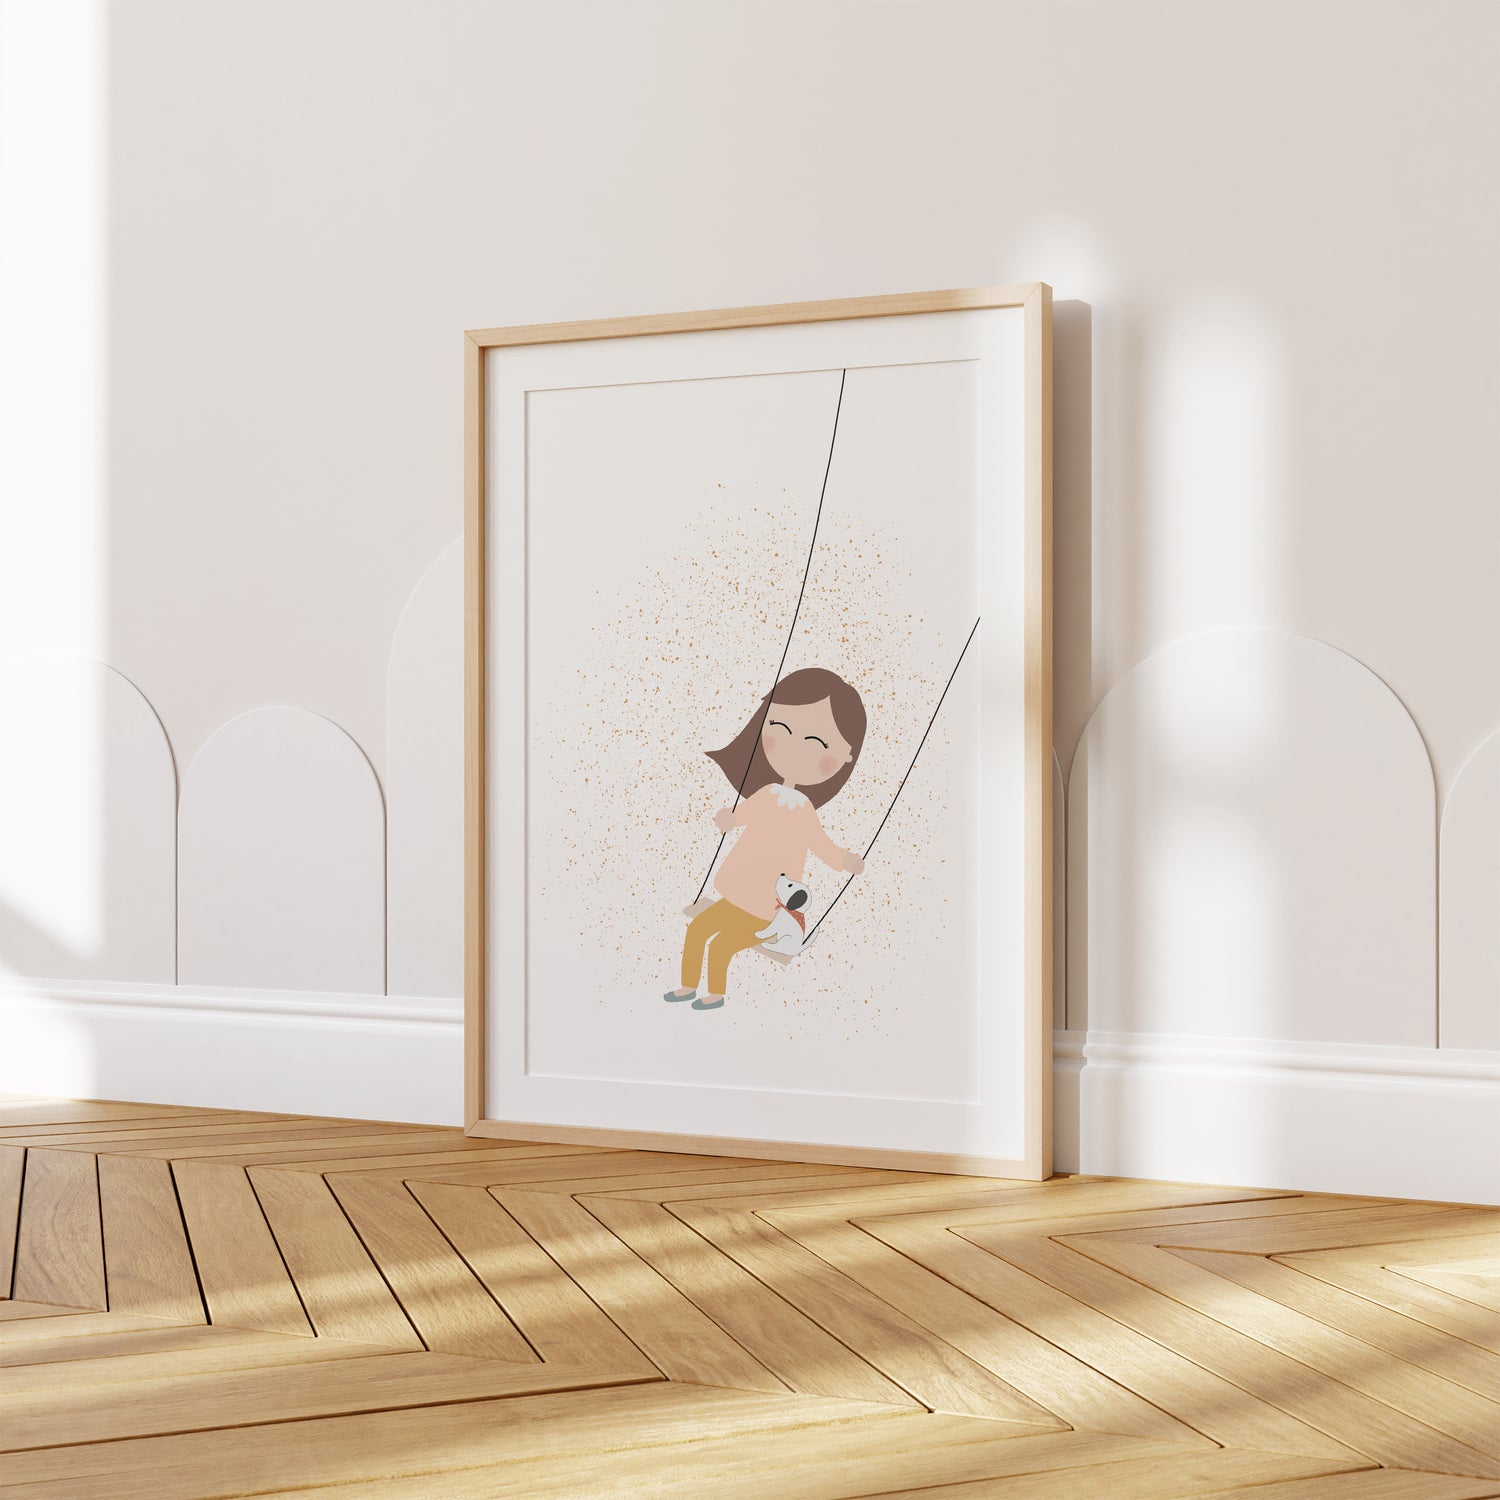 A beautifully illustrated art print featuring a little girl swinging on a swing with her white puppy. This poster certainly brings joy and tenderness to your walls with soft pastel colors.